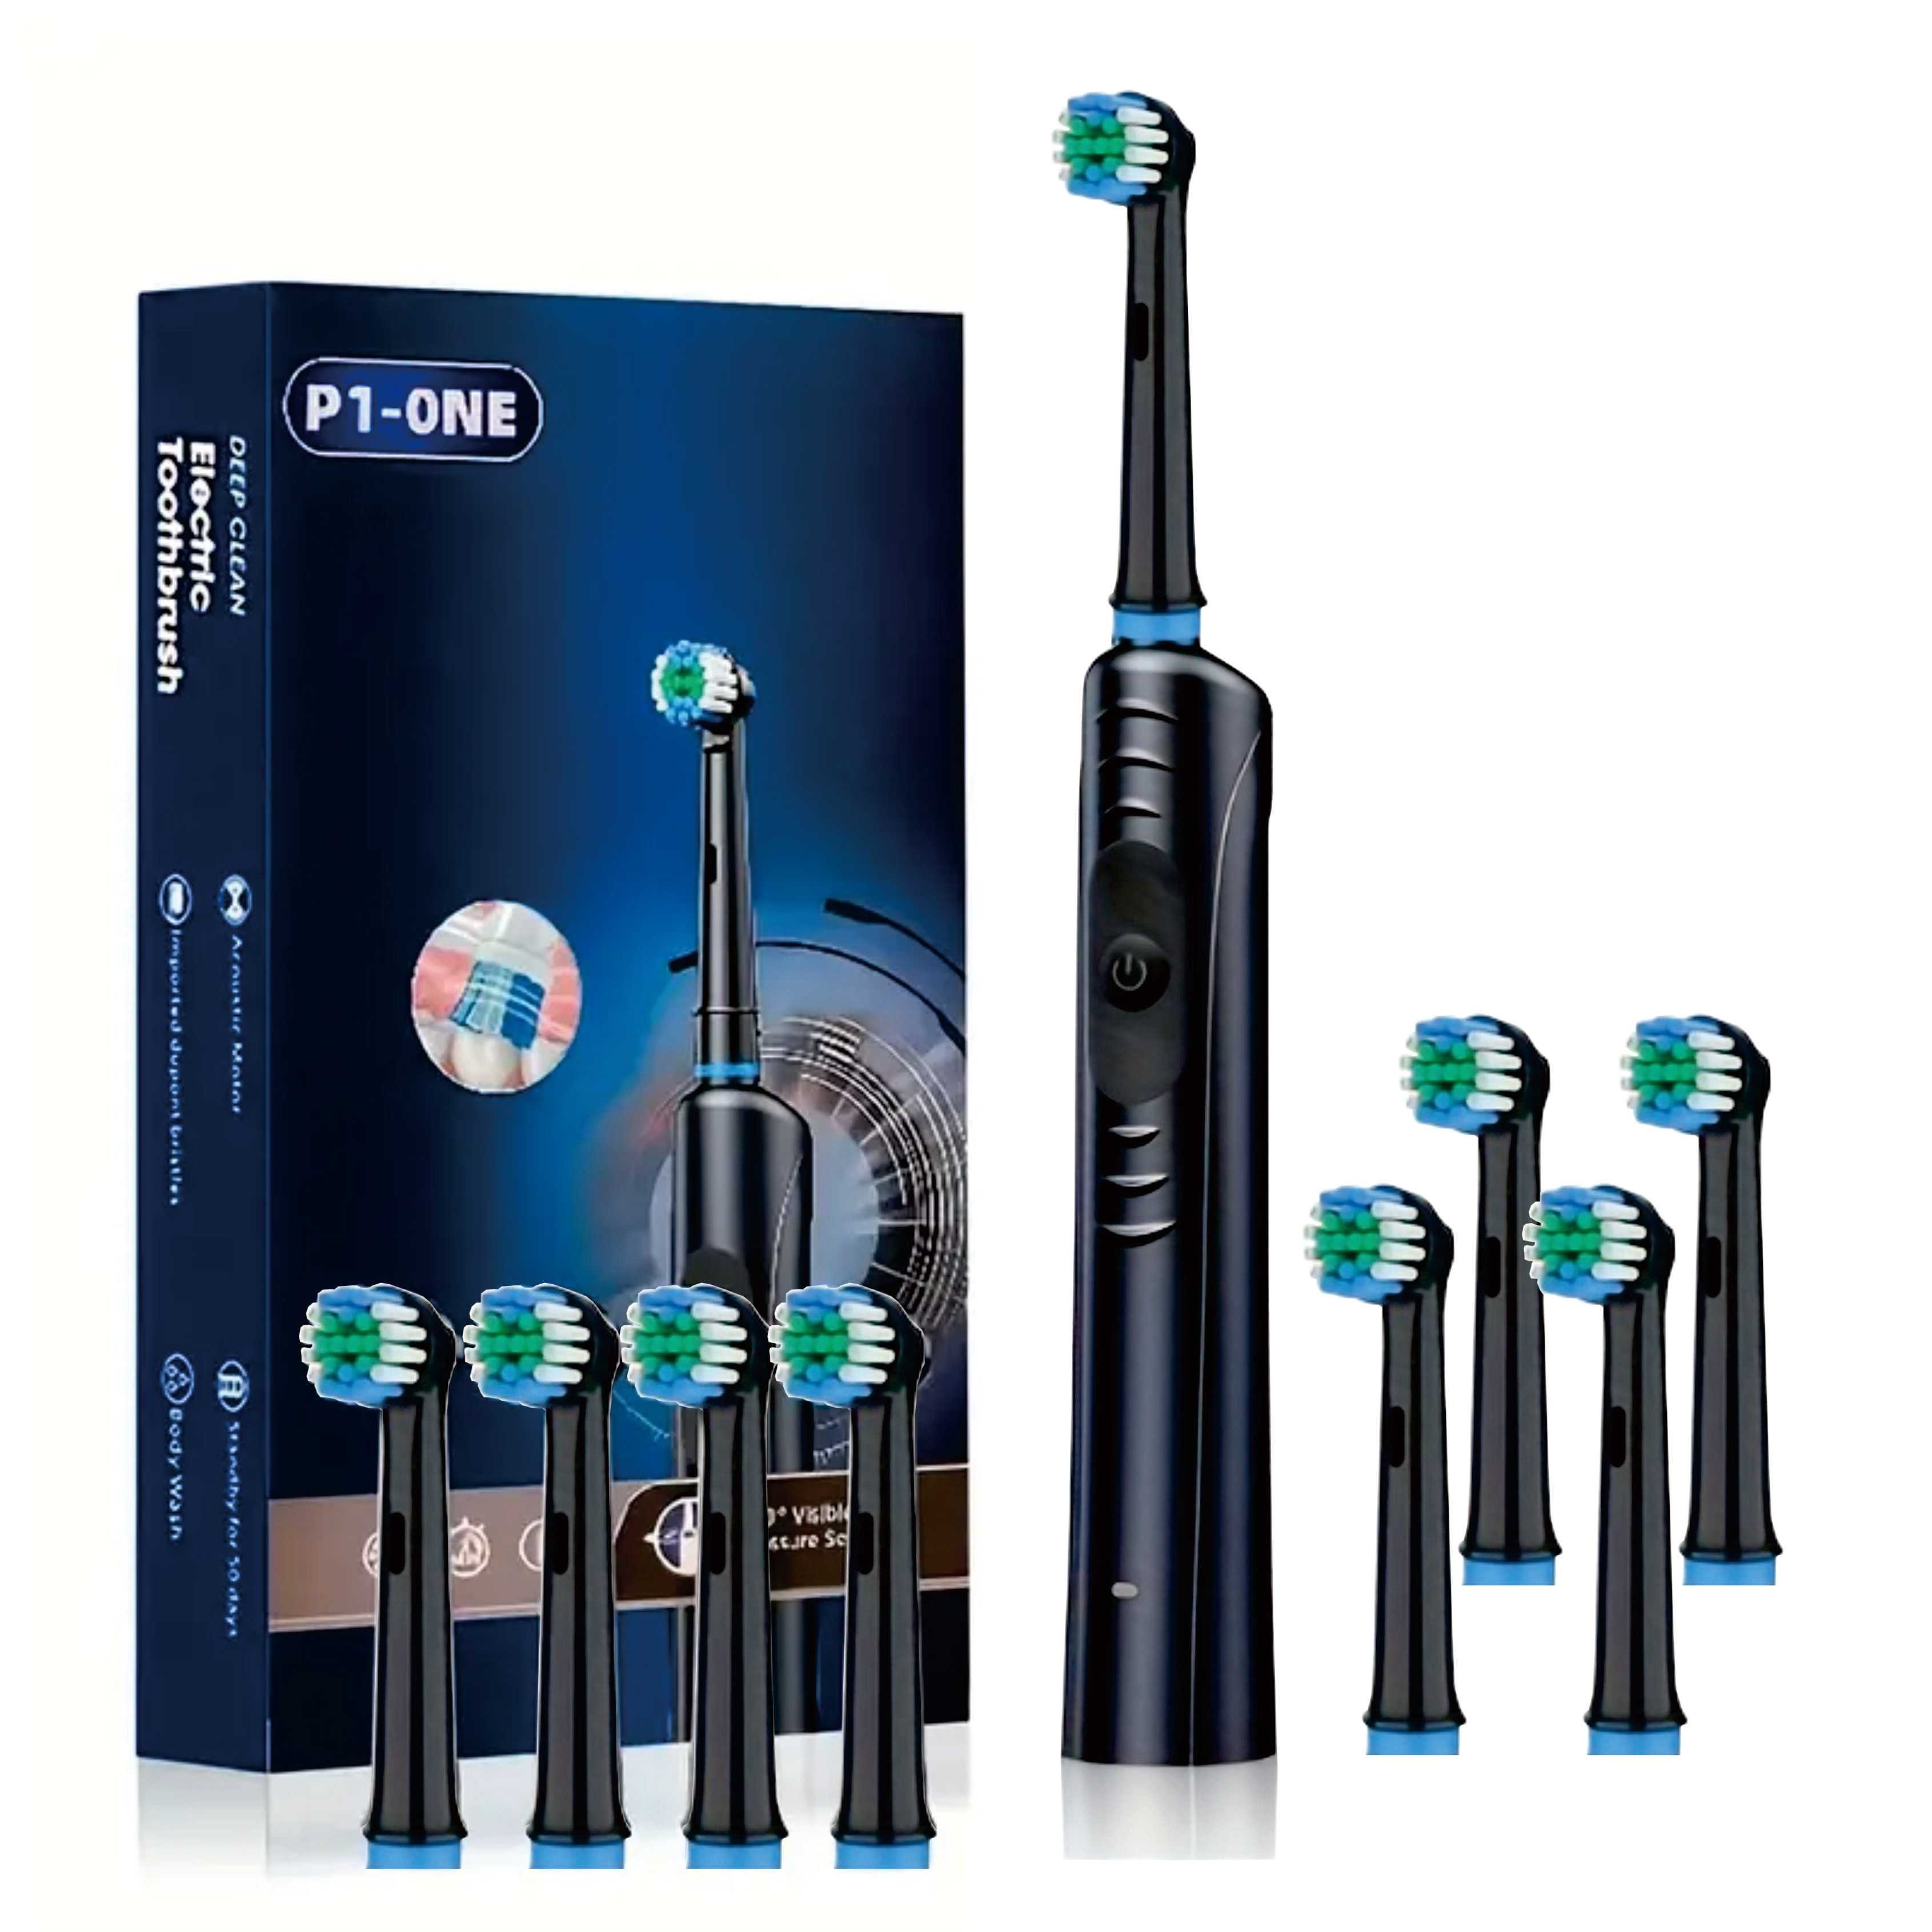 

Electric Toothbrush With 8 Brush Heads, Round Head Design, Full-body Waterproof, Long Standby, Rotating Bristles For Thorough Cleaning